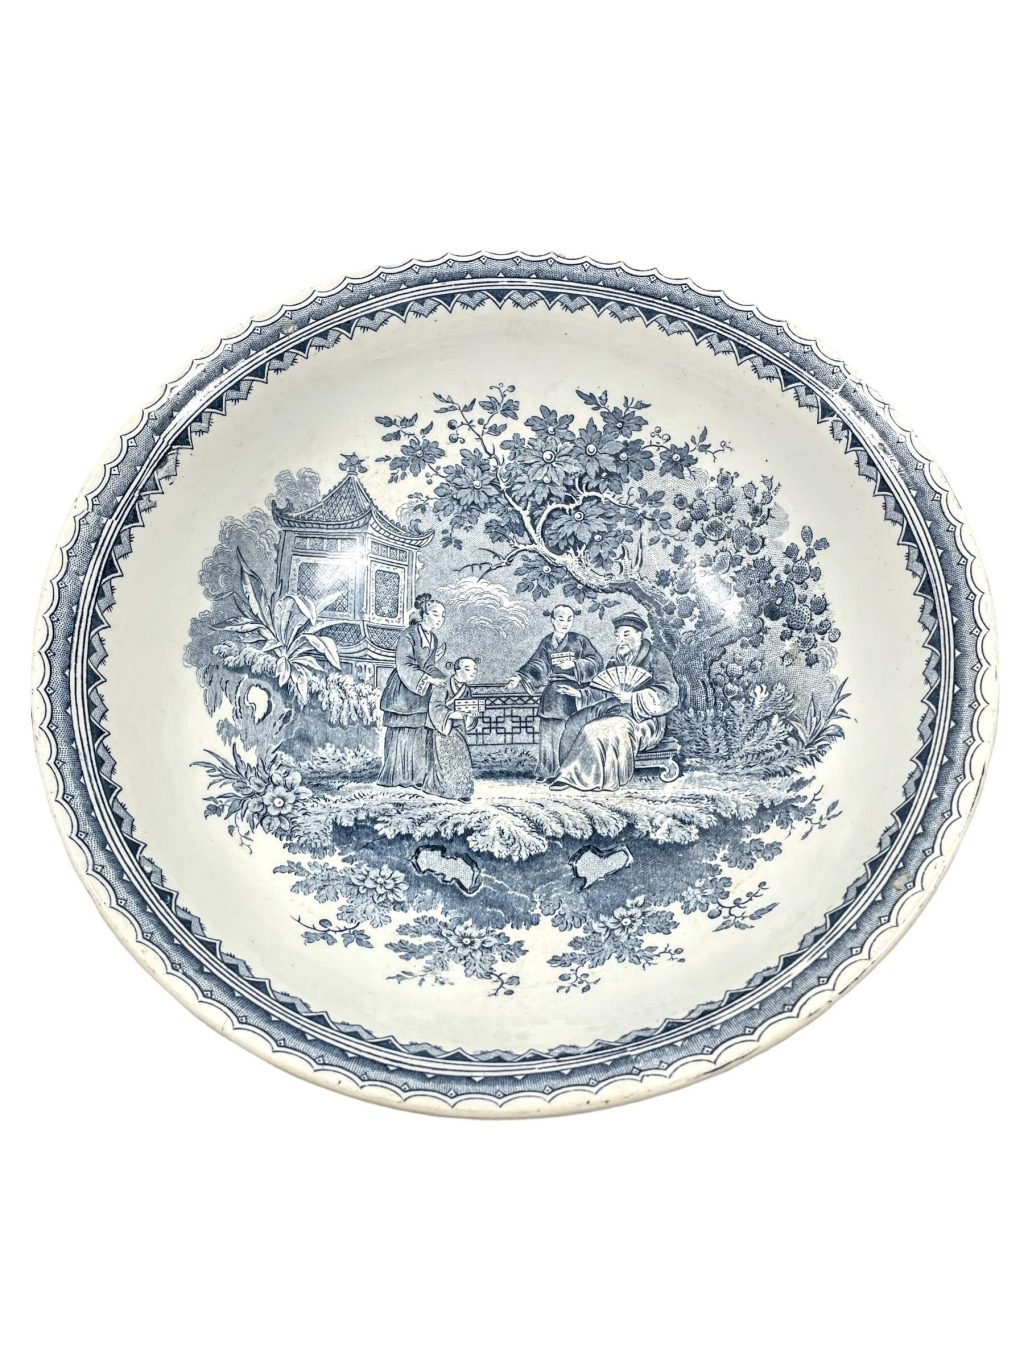 Antique French Chinese Inspired Large Bowl Dish Plate White Blue Serving Table Decoration c1900’s